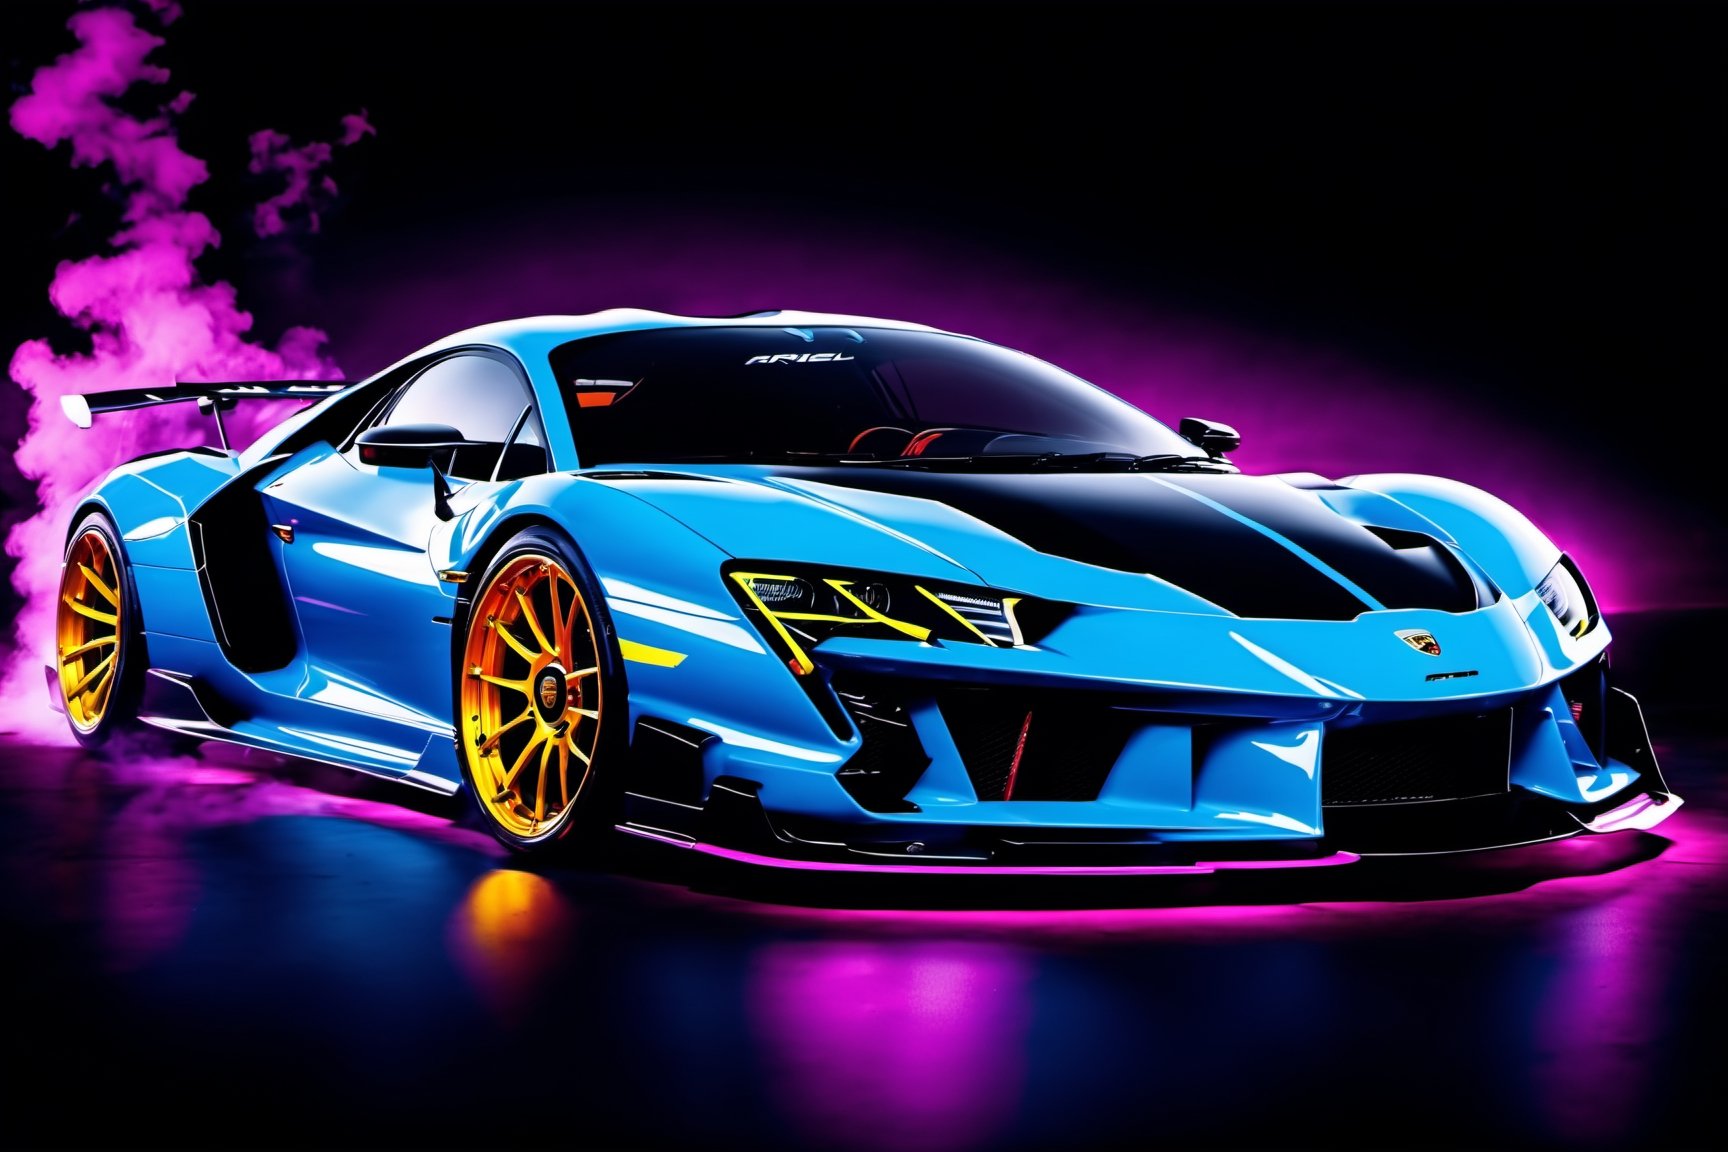  (masterpiece, best quality, ultra-detailed, 8K), race car, street racing-inspired,Drifting inspired, LED, ((Twin headlights)), (((Bright neon color racing stripes))), (Black racing wheels), Wheelspin showing motion, Show car in motion, Burnout,  wide body kit, modified car,  racing livery, masterpiece, best quality, realistic, ultra highres, (((depth of field))), (full dual colour neon lights:1.2), (hard dual color lighting:1.4), (detailed background), (masterpiece:1.2), (ultra detailed), (best quality), intricate, comprehensive cinematic, magical photography, (gradients), glossy, Night with galaxy sky, Fast action style, fire out of tail pipes, Sideways drifting in to a turn, Neon galaxy metalic paint with race stripes, GTR Nismo, NSX, Porsche, Lamborghini, Ferrari, Bugatti, Ariel Atom, BMW, Audi, Mazda, Toyota supra, Lamborghini Aventador,  aesthetic,intricate, realistic,cinematic lighting, Neon Paint, streaks of fire,c_car